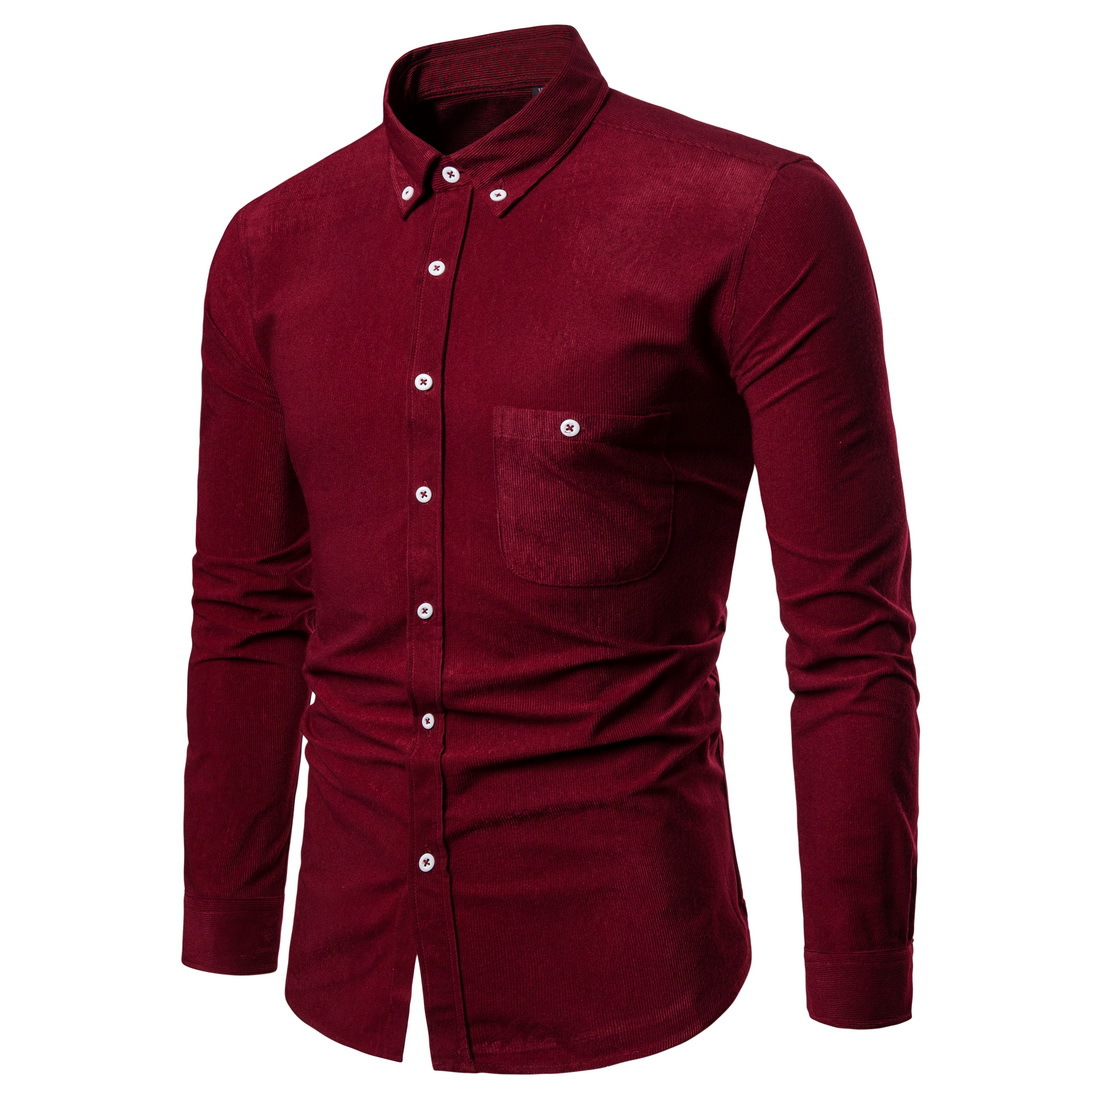 Men Shirt Spring Autumn Corduroy Long Sleeve Single Breasted Casual Slim Fit Plus Size Shirt wine red